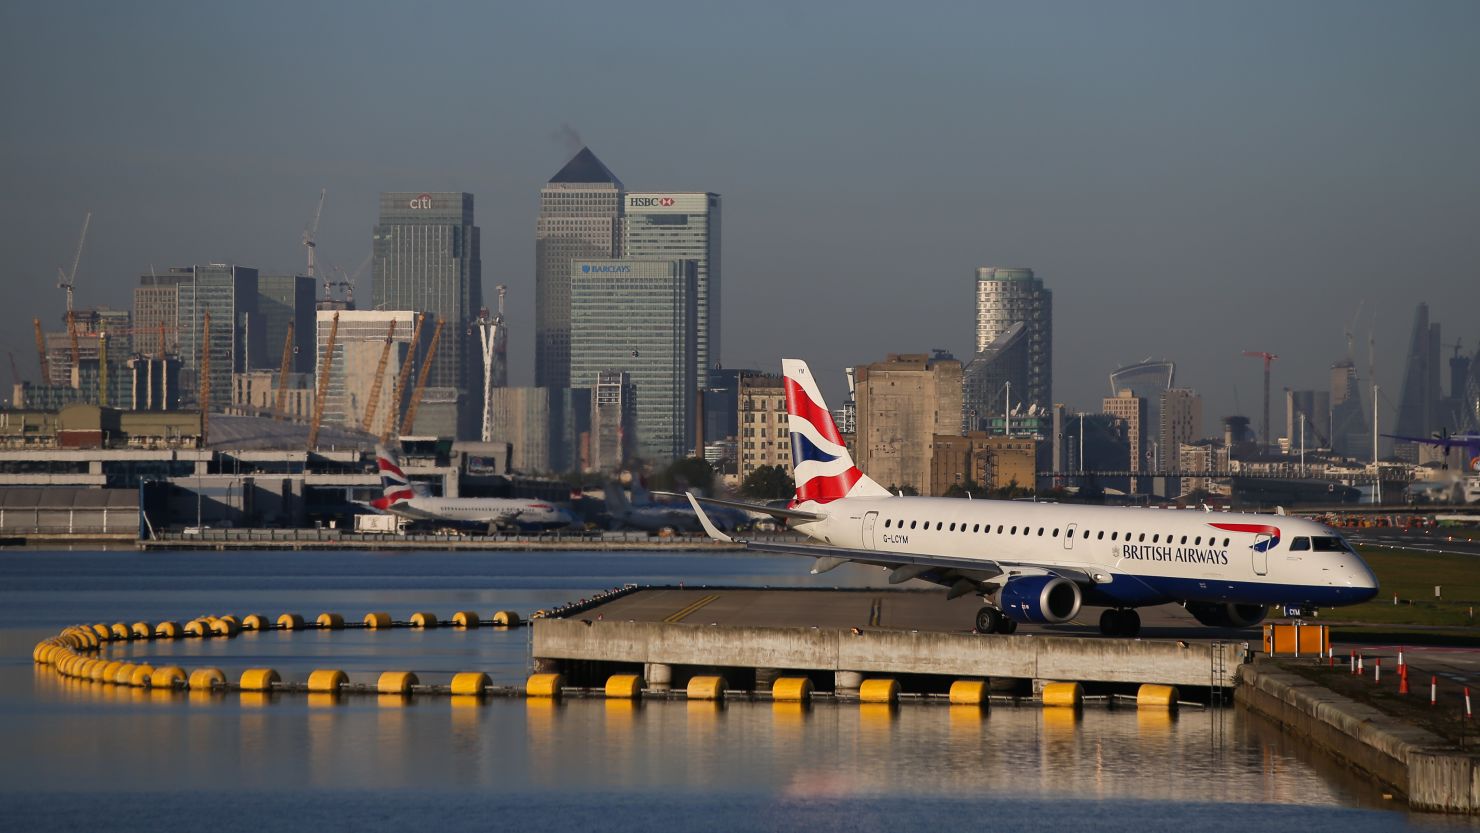 A plane waits on the runway at London City Airport.